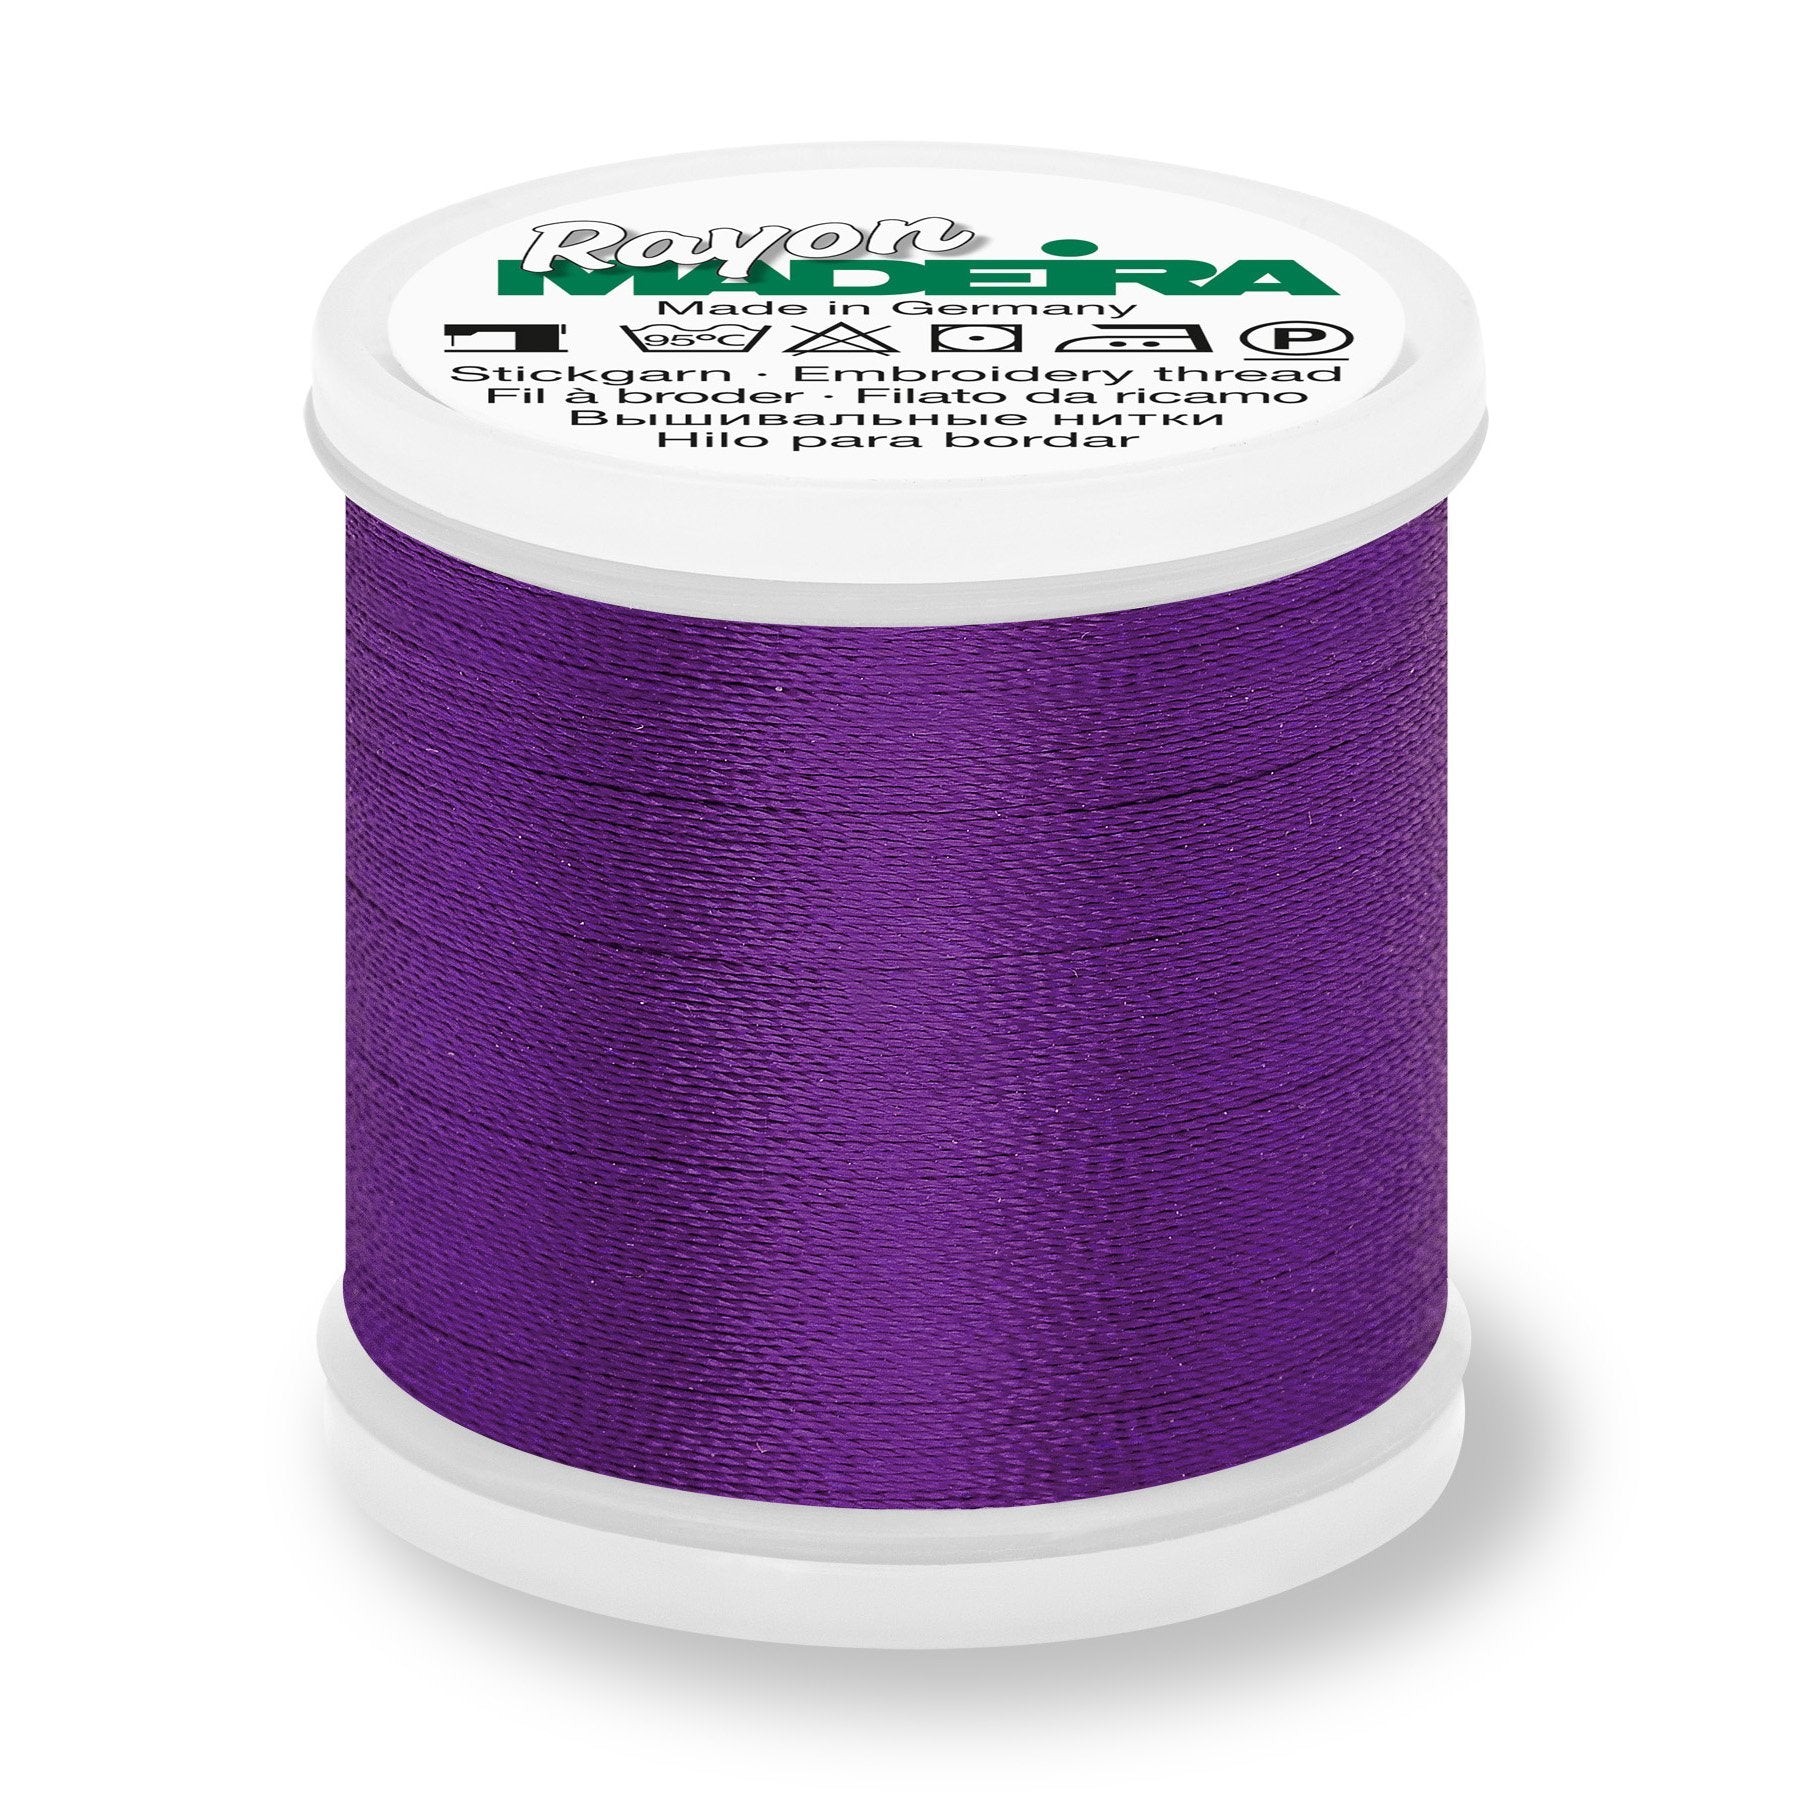 Madeira Rayon 40 Embroidery Thread 200m #1122 Dark Purple from Jaycotts Sewing Supplies